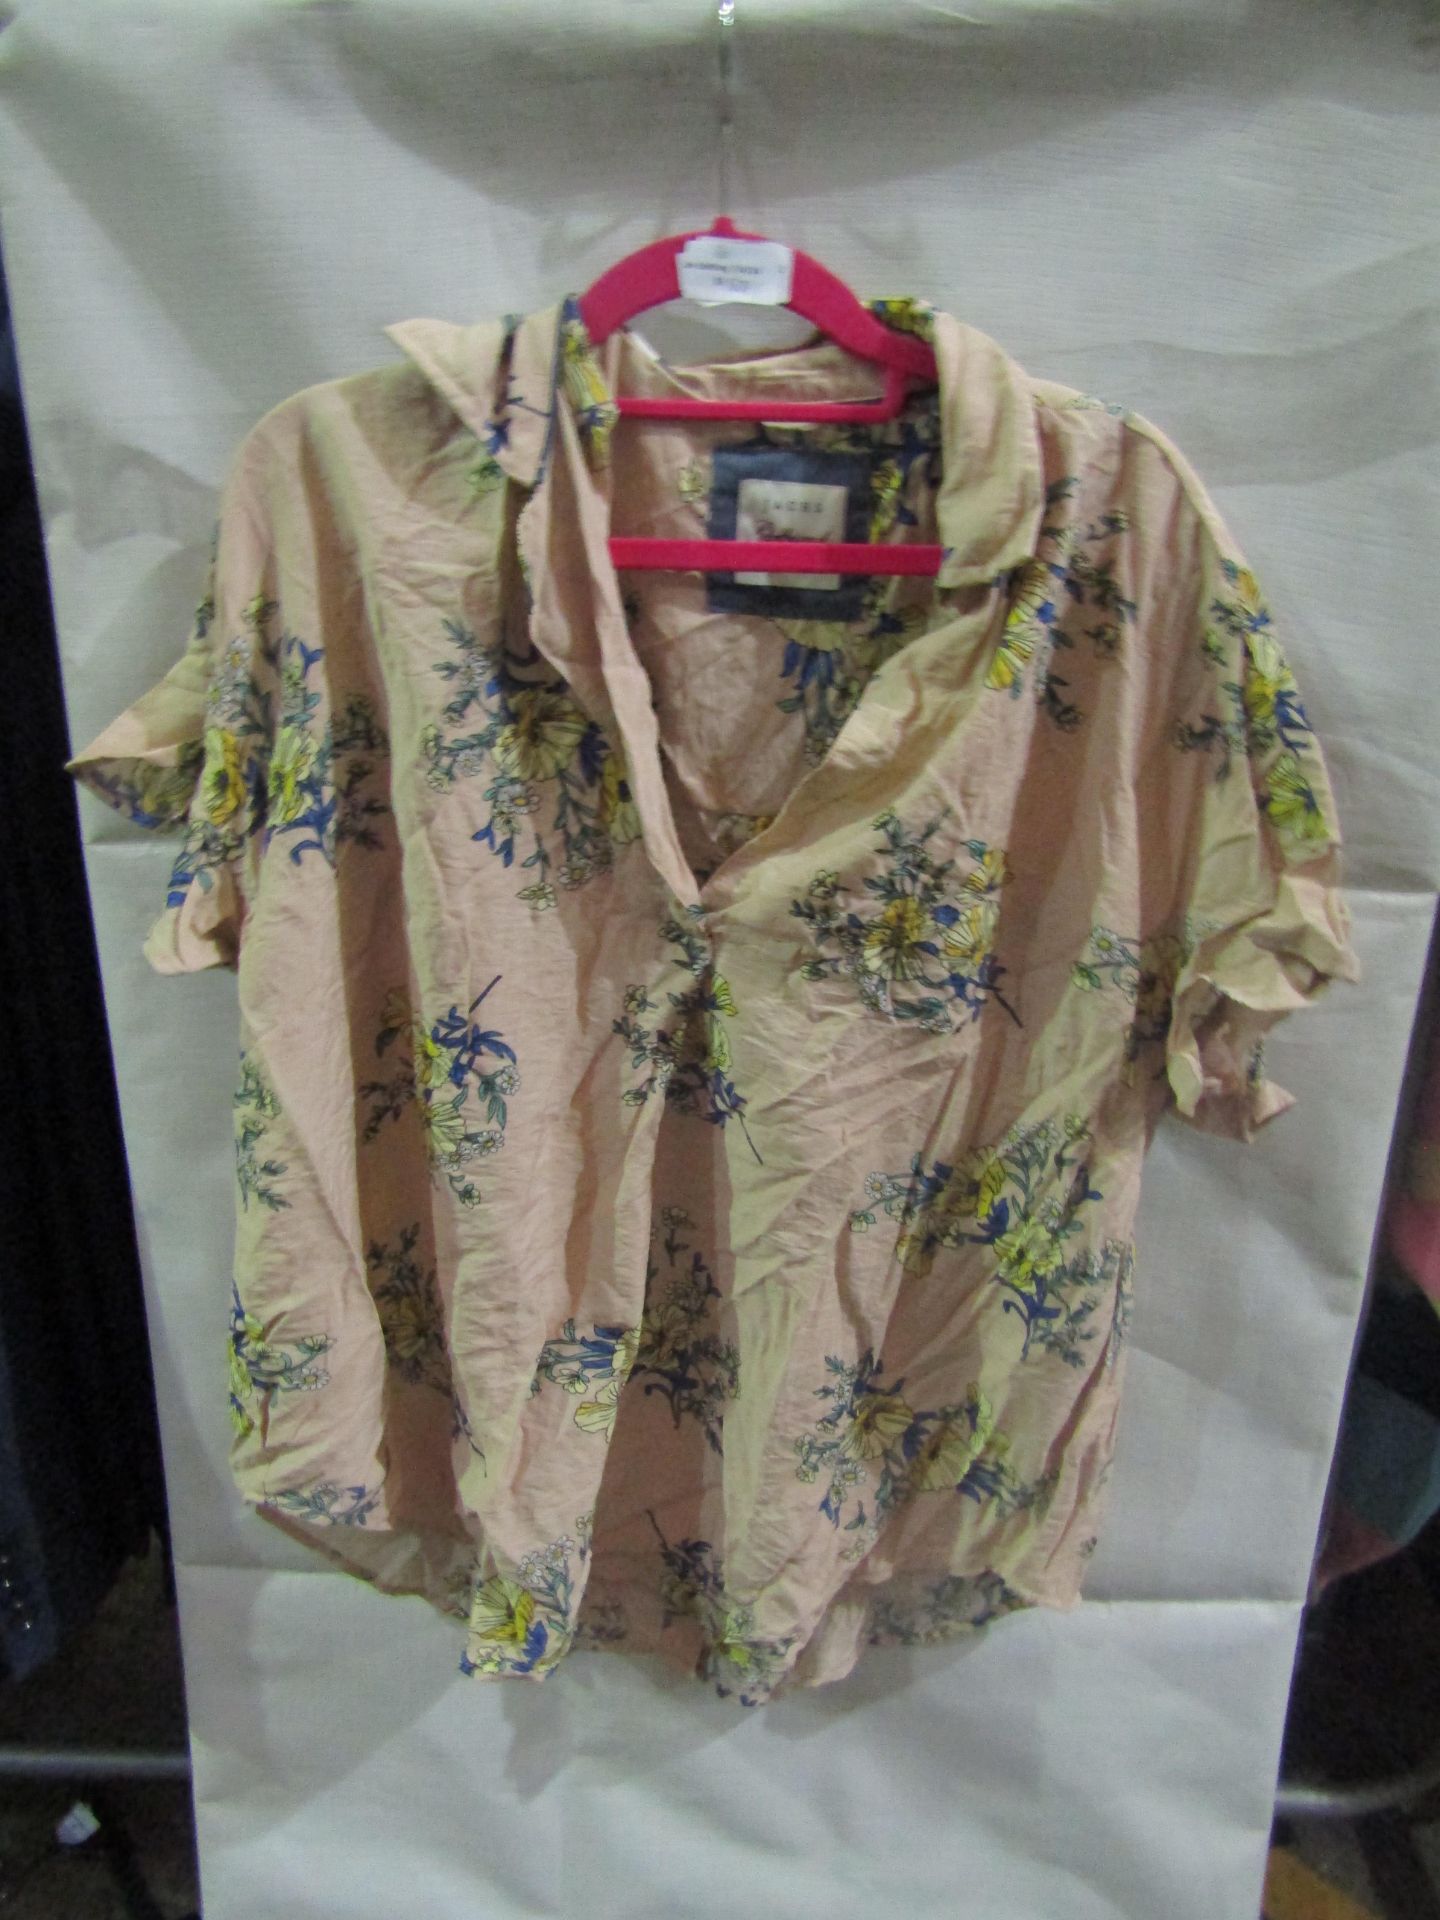 Jacks Girlfriend New York Ladies Blouse Floral Pink, Size: XL - Good Condition.